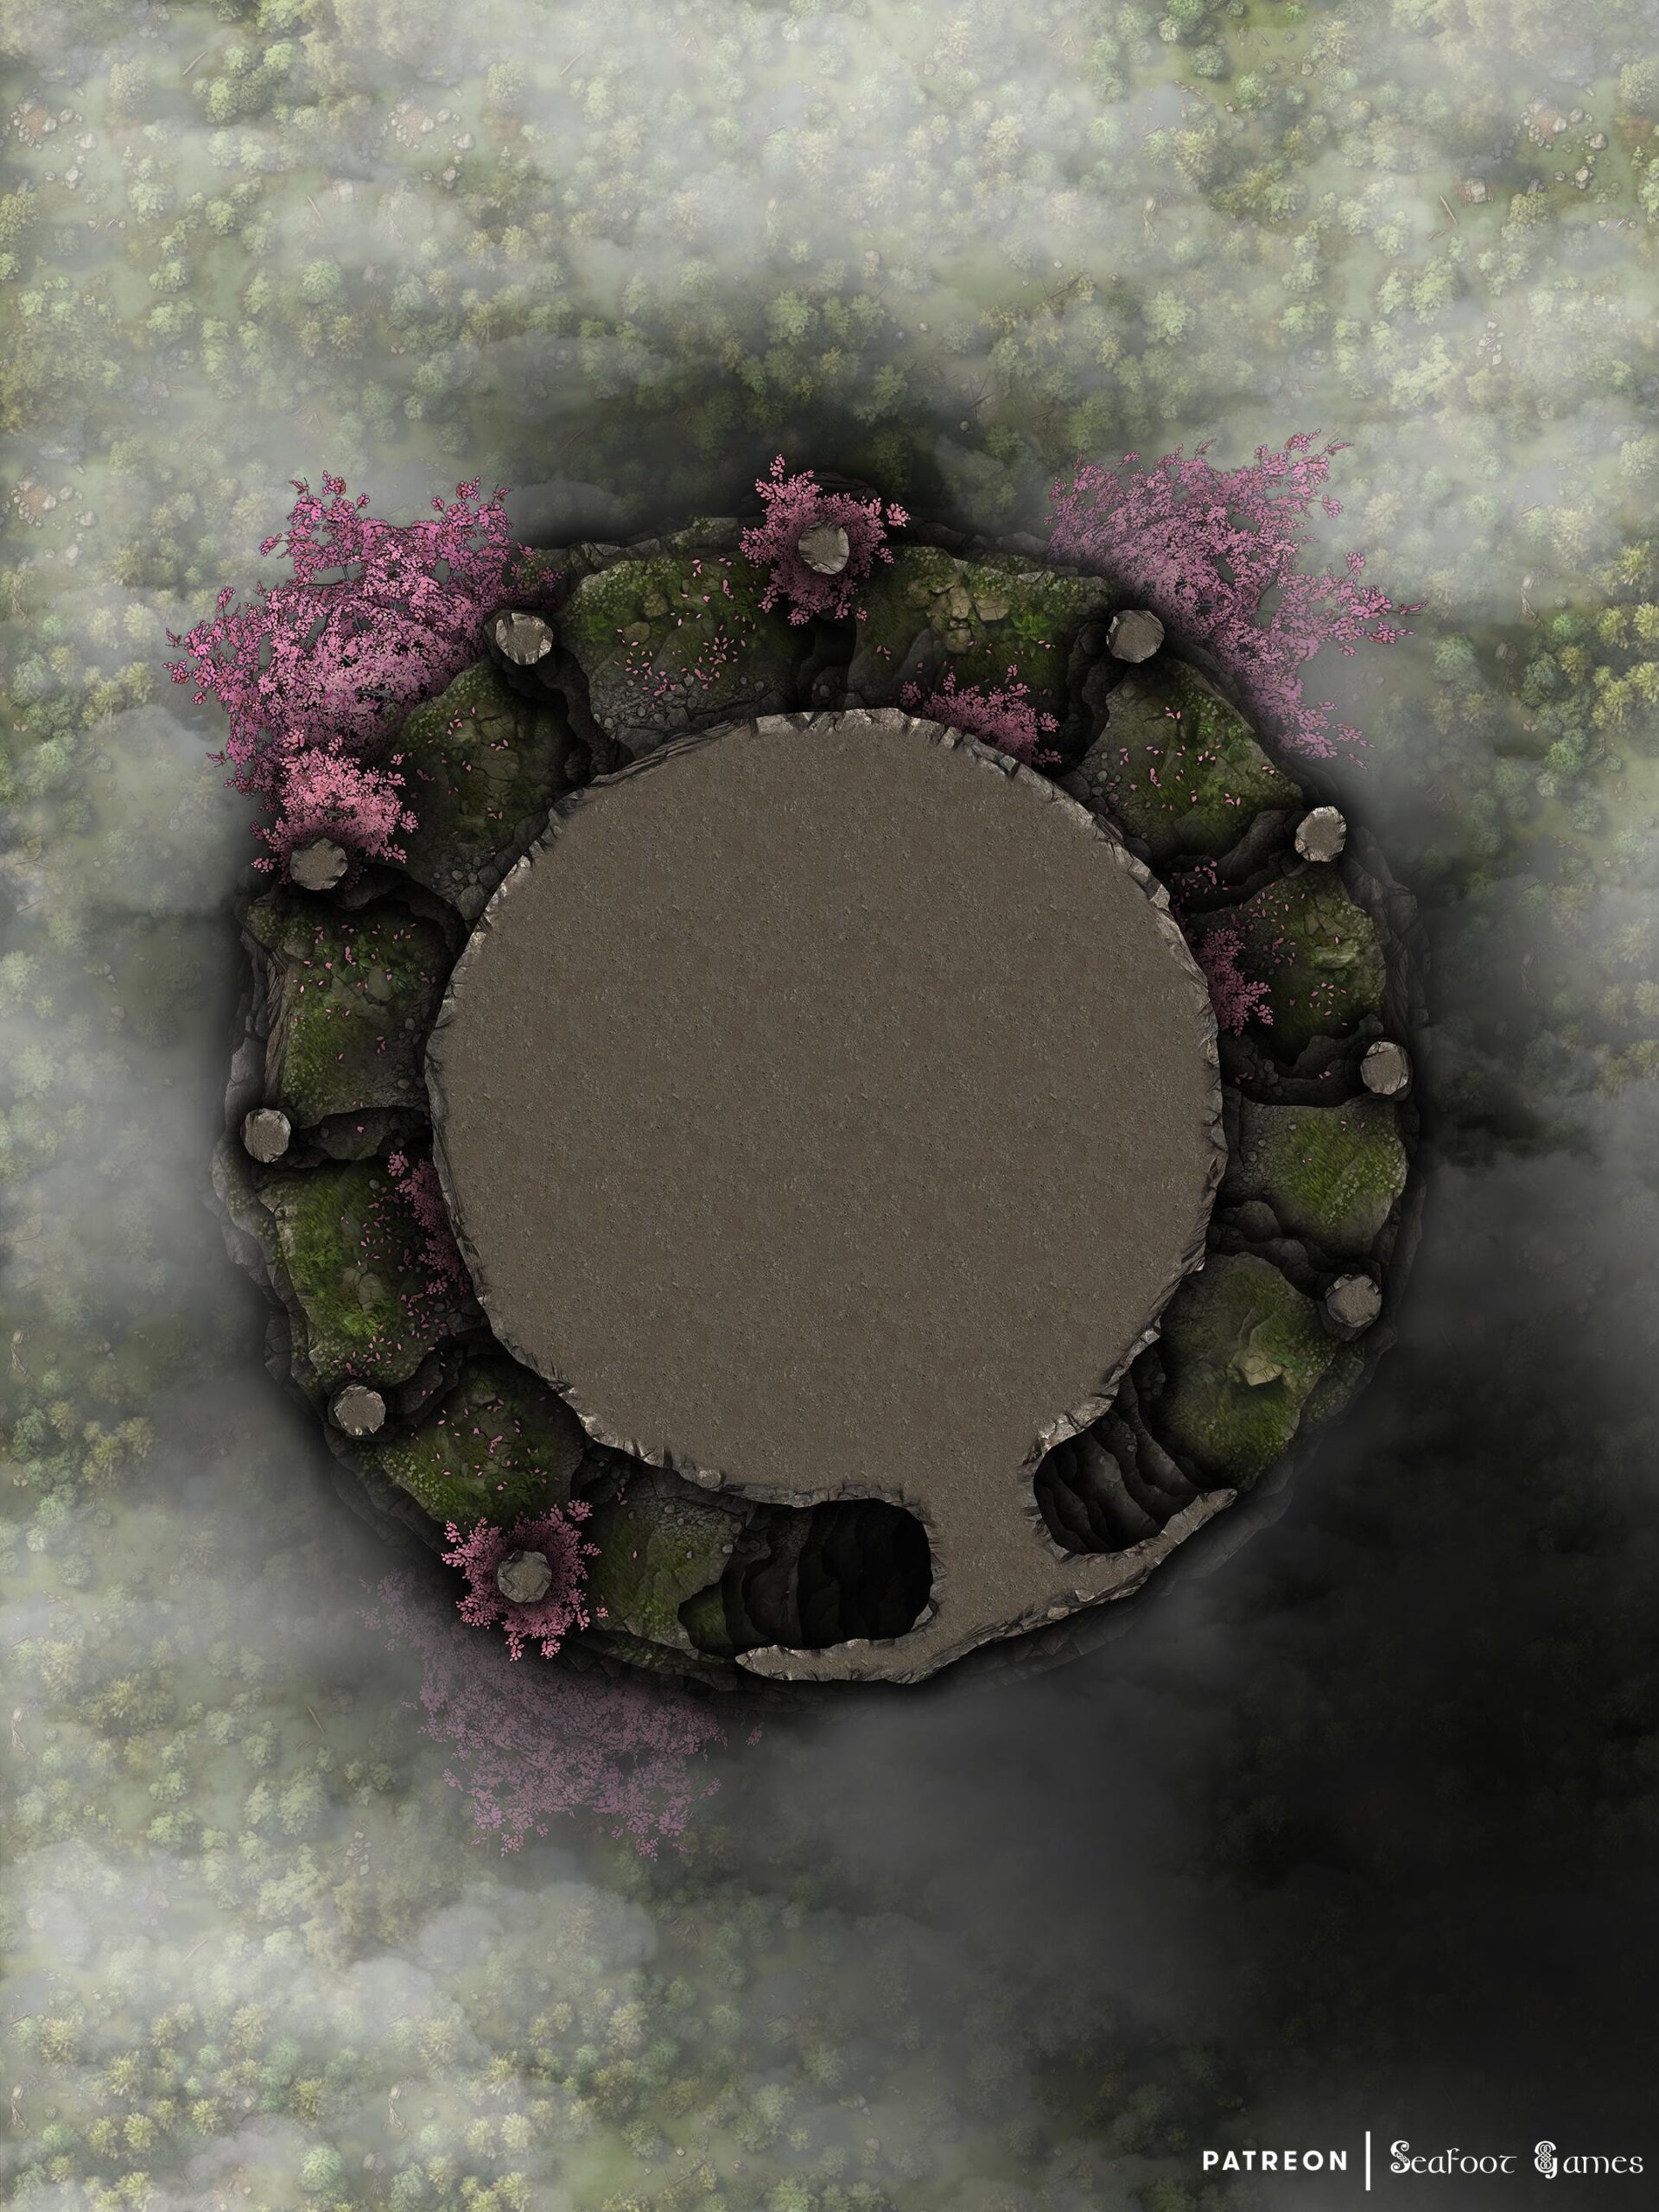 Level 2 of our Pillar of the Seventh Dragon Free 40x30 Multi-Level Battlemap & Adventure, featuring dragon orbs & a powerful wish of good for evil. VTT ready!